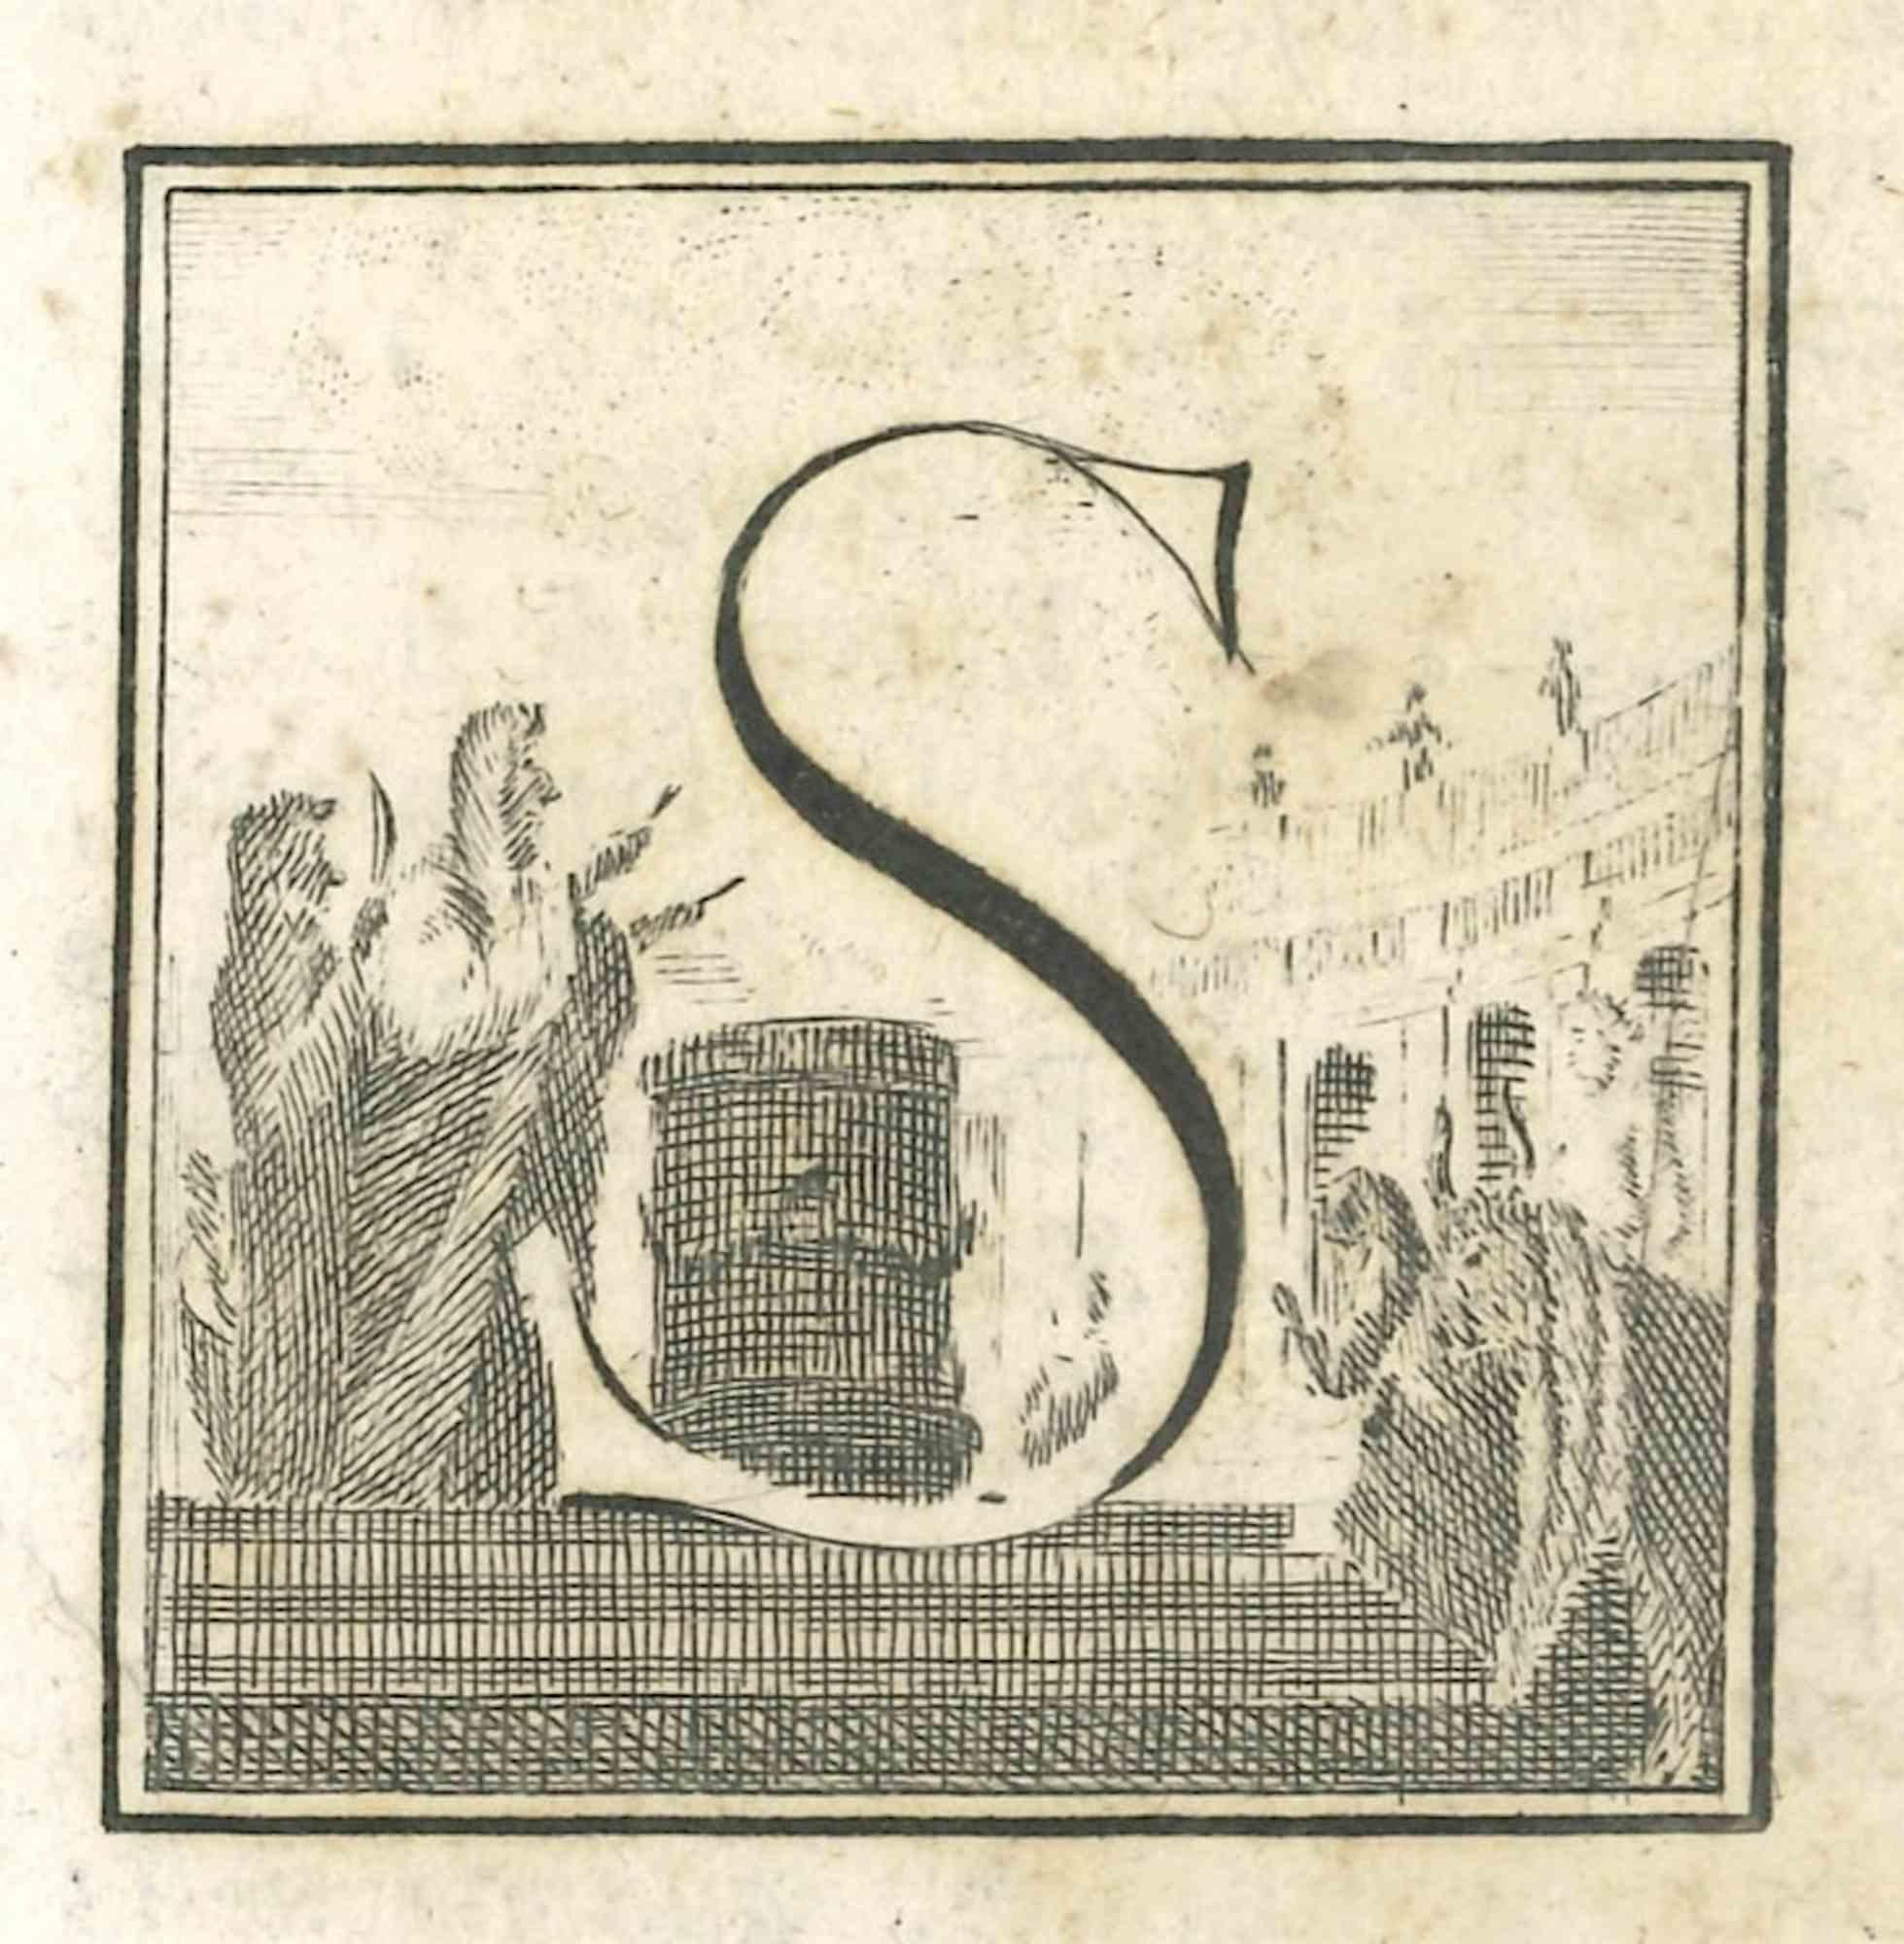 Unknown Figurative Print - Letter of the Alphabet S - Etching - 18th Century